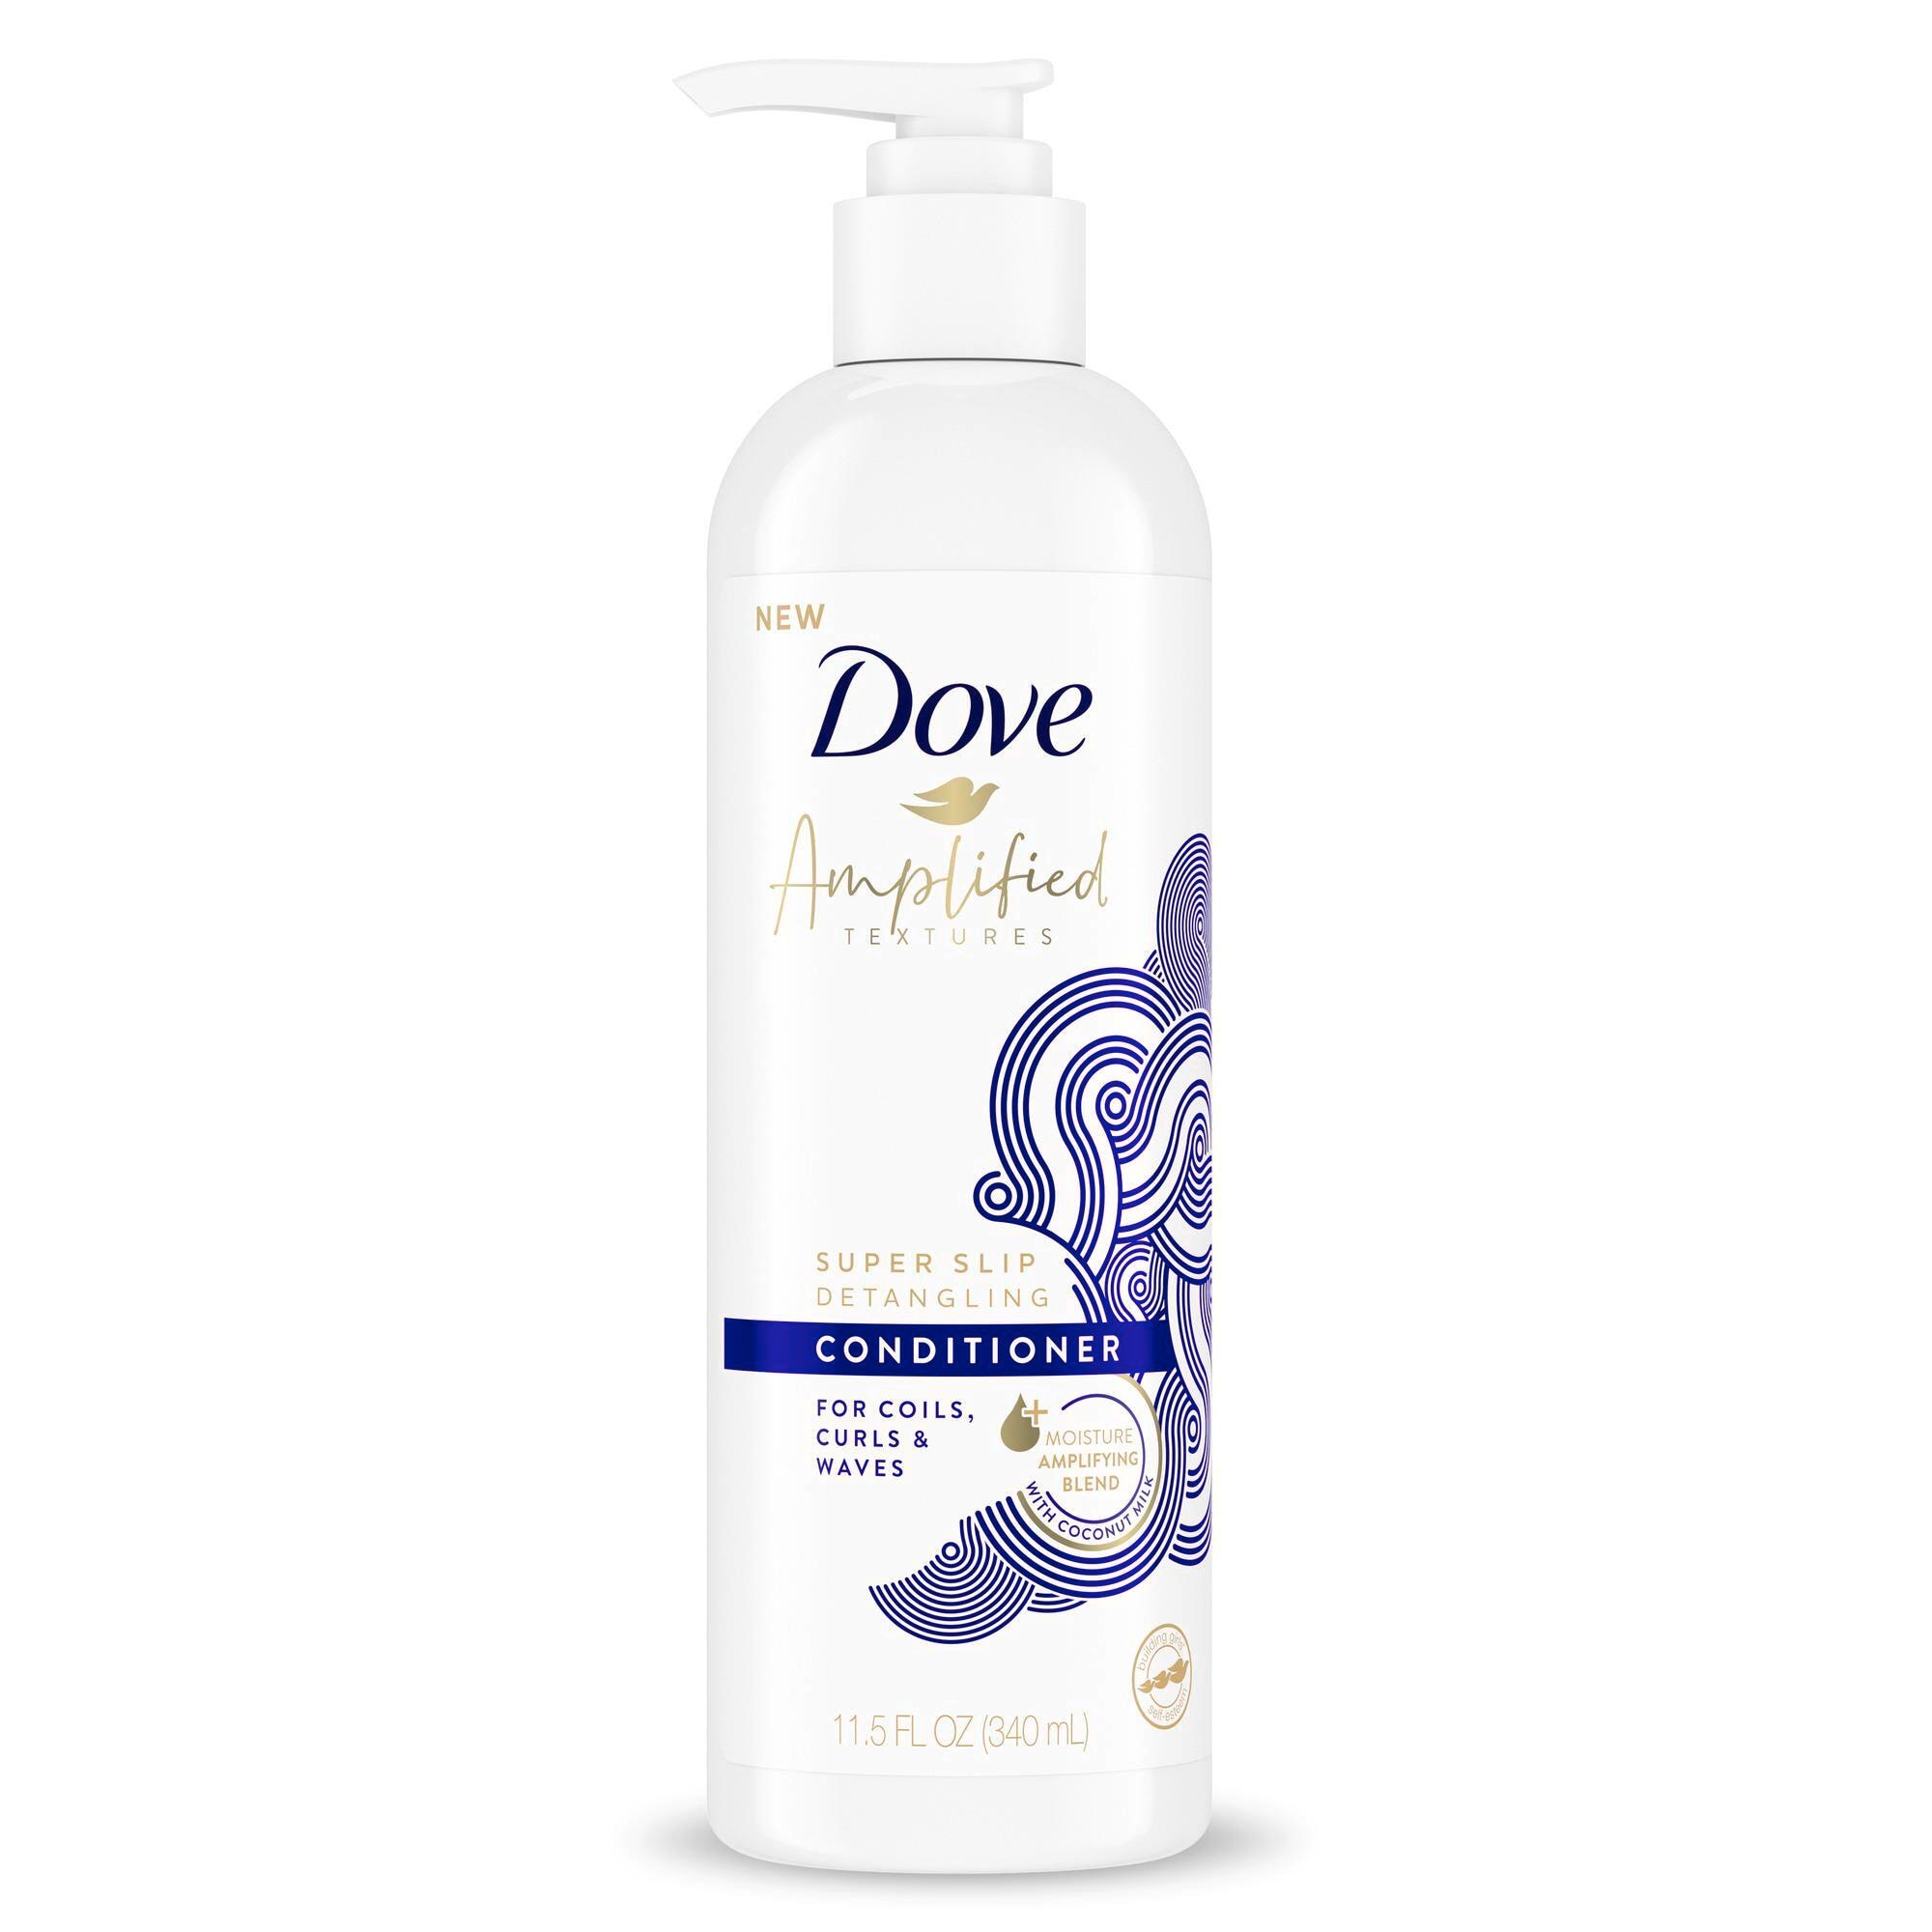 Dove Amplified Textures Super Slip Detangling with Moisture Amplifying blend Conditioner for curly hair 340 ml